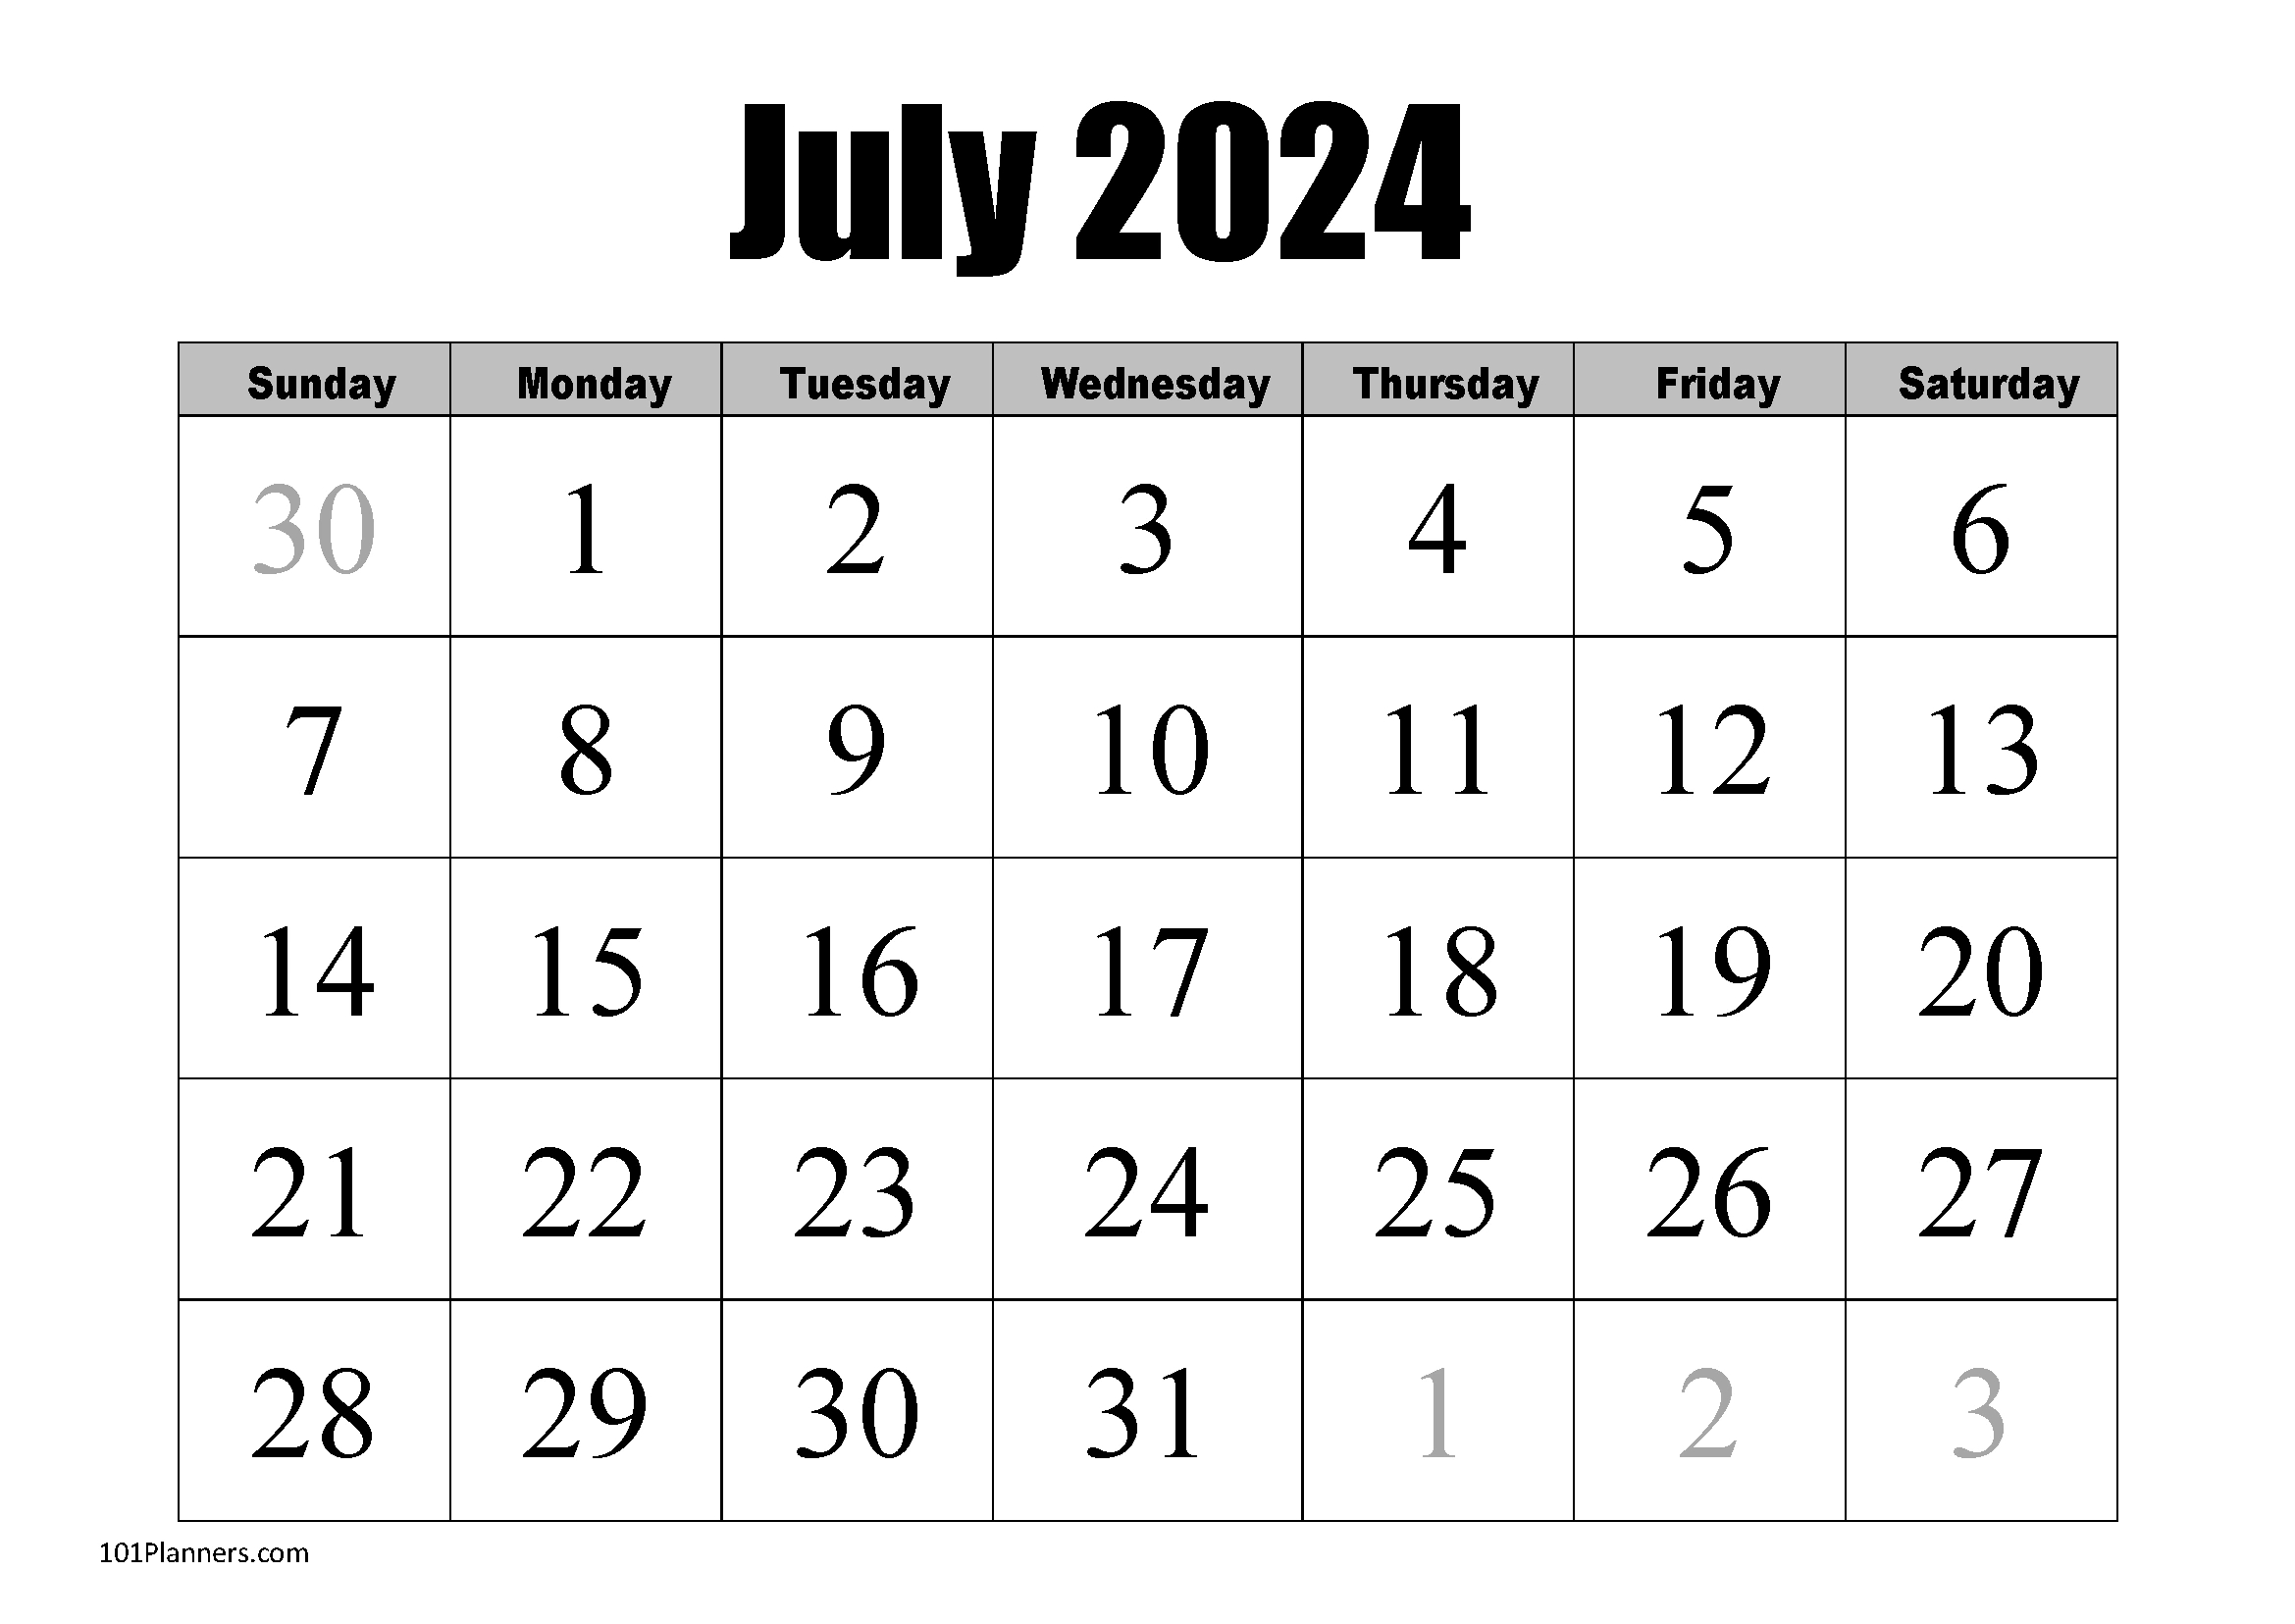 Free Printable July 2024 Calendar | Customize Online pertaining to July 2024 Calendar Big Numbers